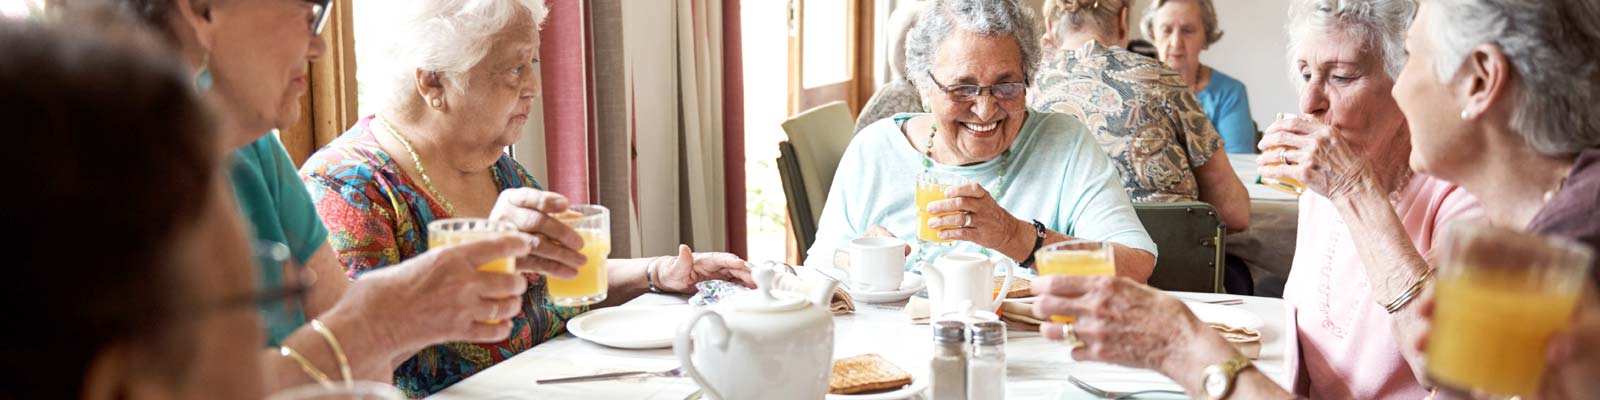 Alzheimer's patients enjoying each other in a memory care home - Browse the Alzheimer's Store - The best products dining for those with Alzheimer's, Dementia, Stroke, Memory Loss and for senior care